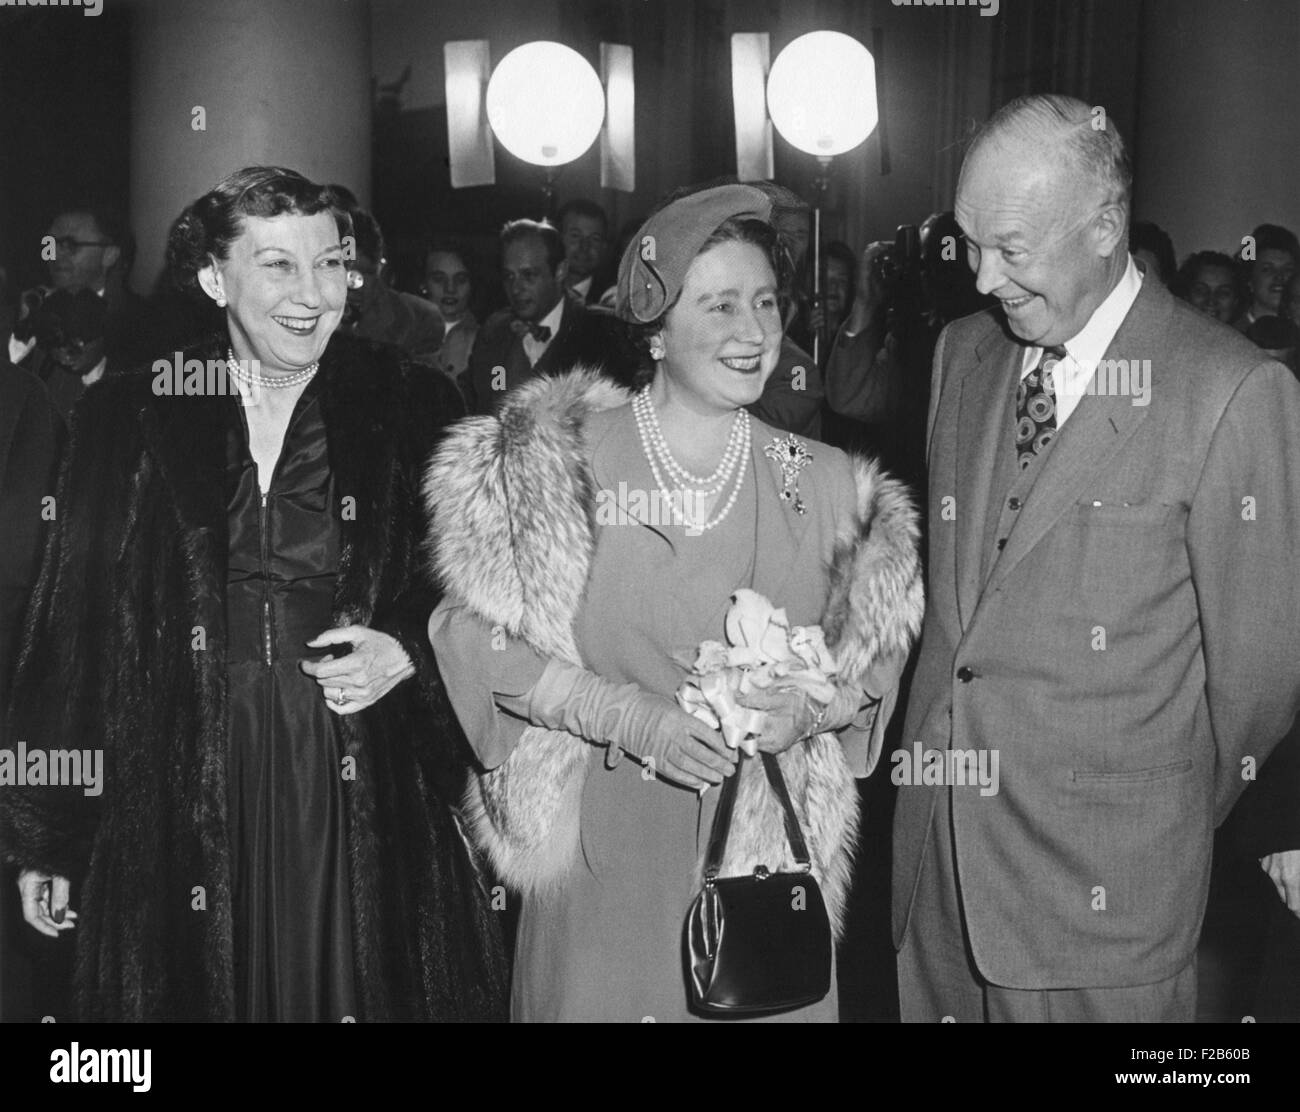 President and Mamie Eisenhower welcome Queen Elizabeth, the Queen Mother, at the White House. Nov. 4, 1954. She was given a dinner followed by a musical performance in the East Room. - (BSLOC 2014 16 203) Stock Photo